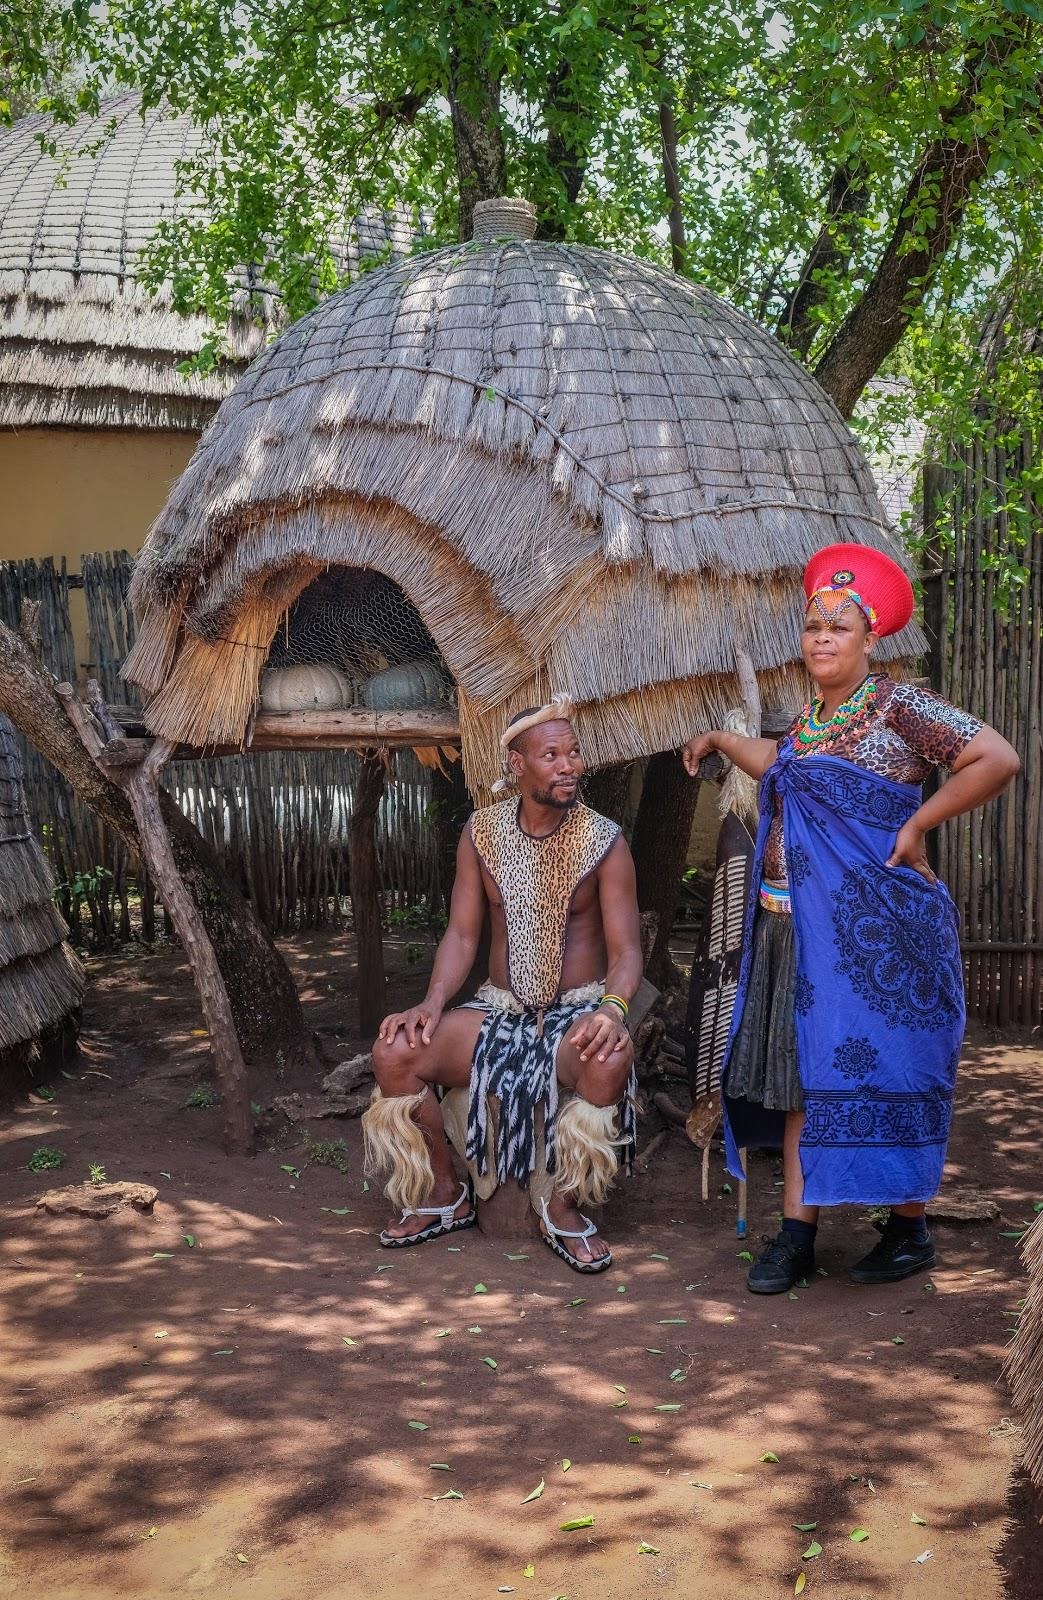 culture and heritage tourism in south africa